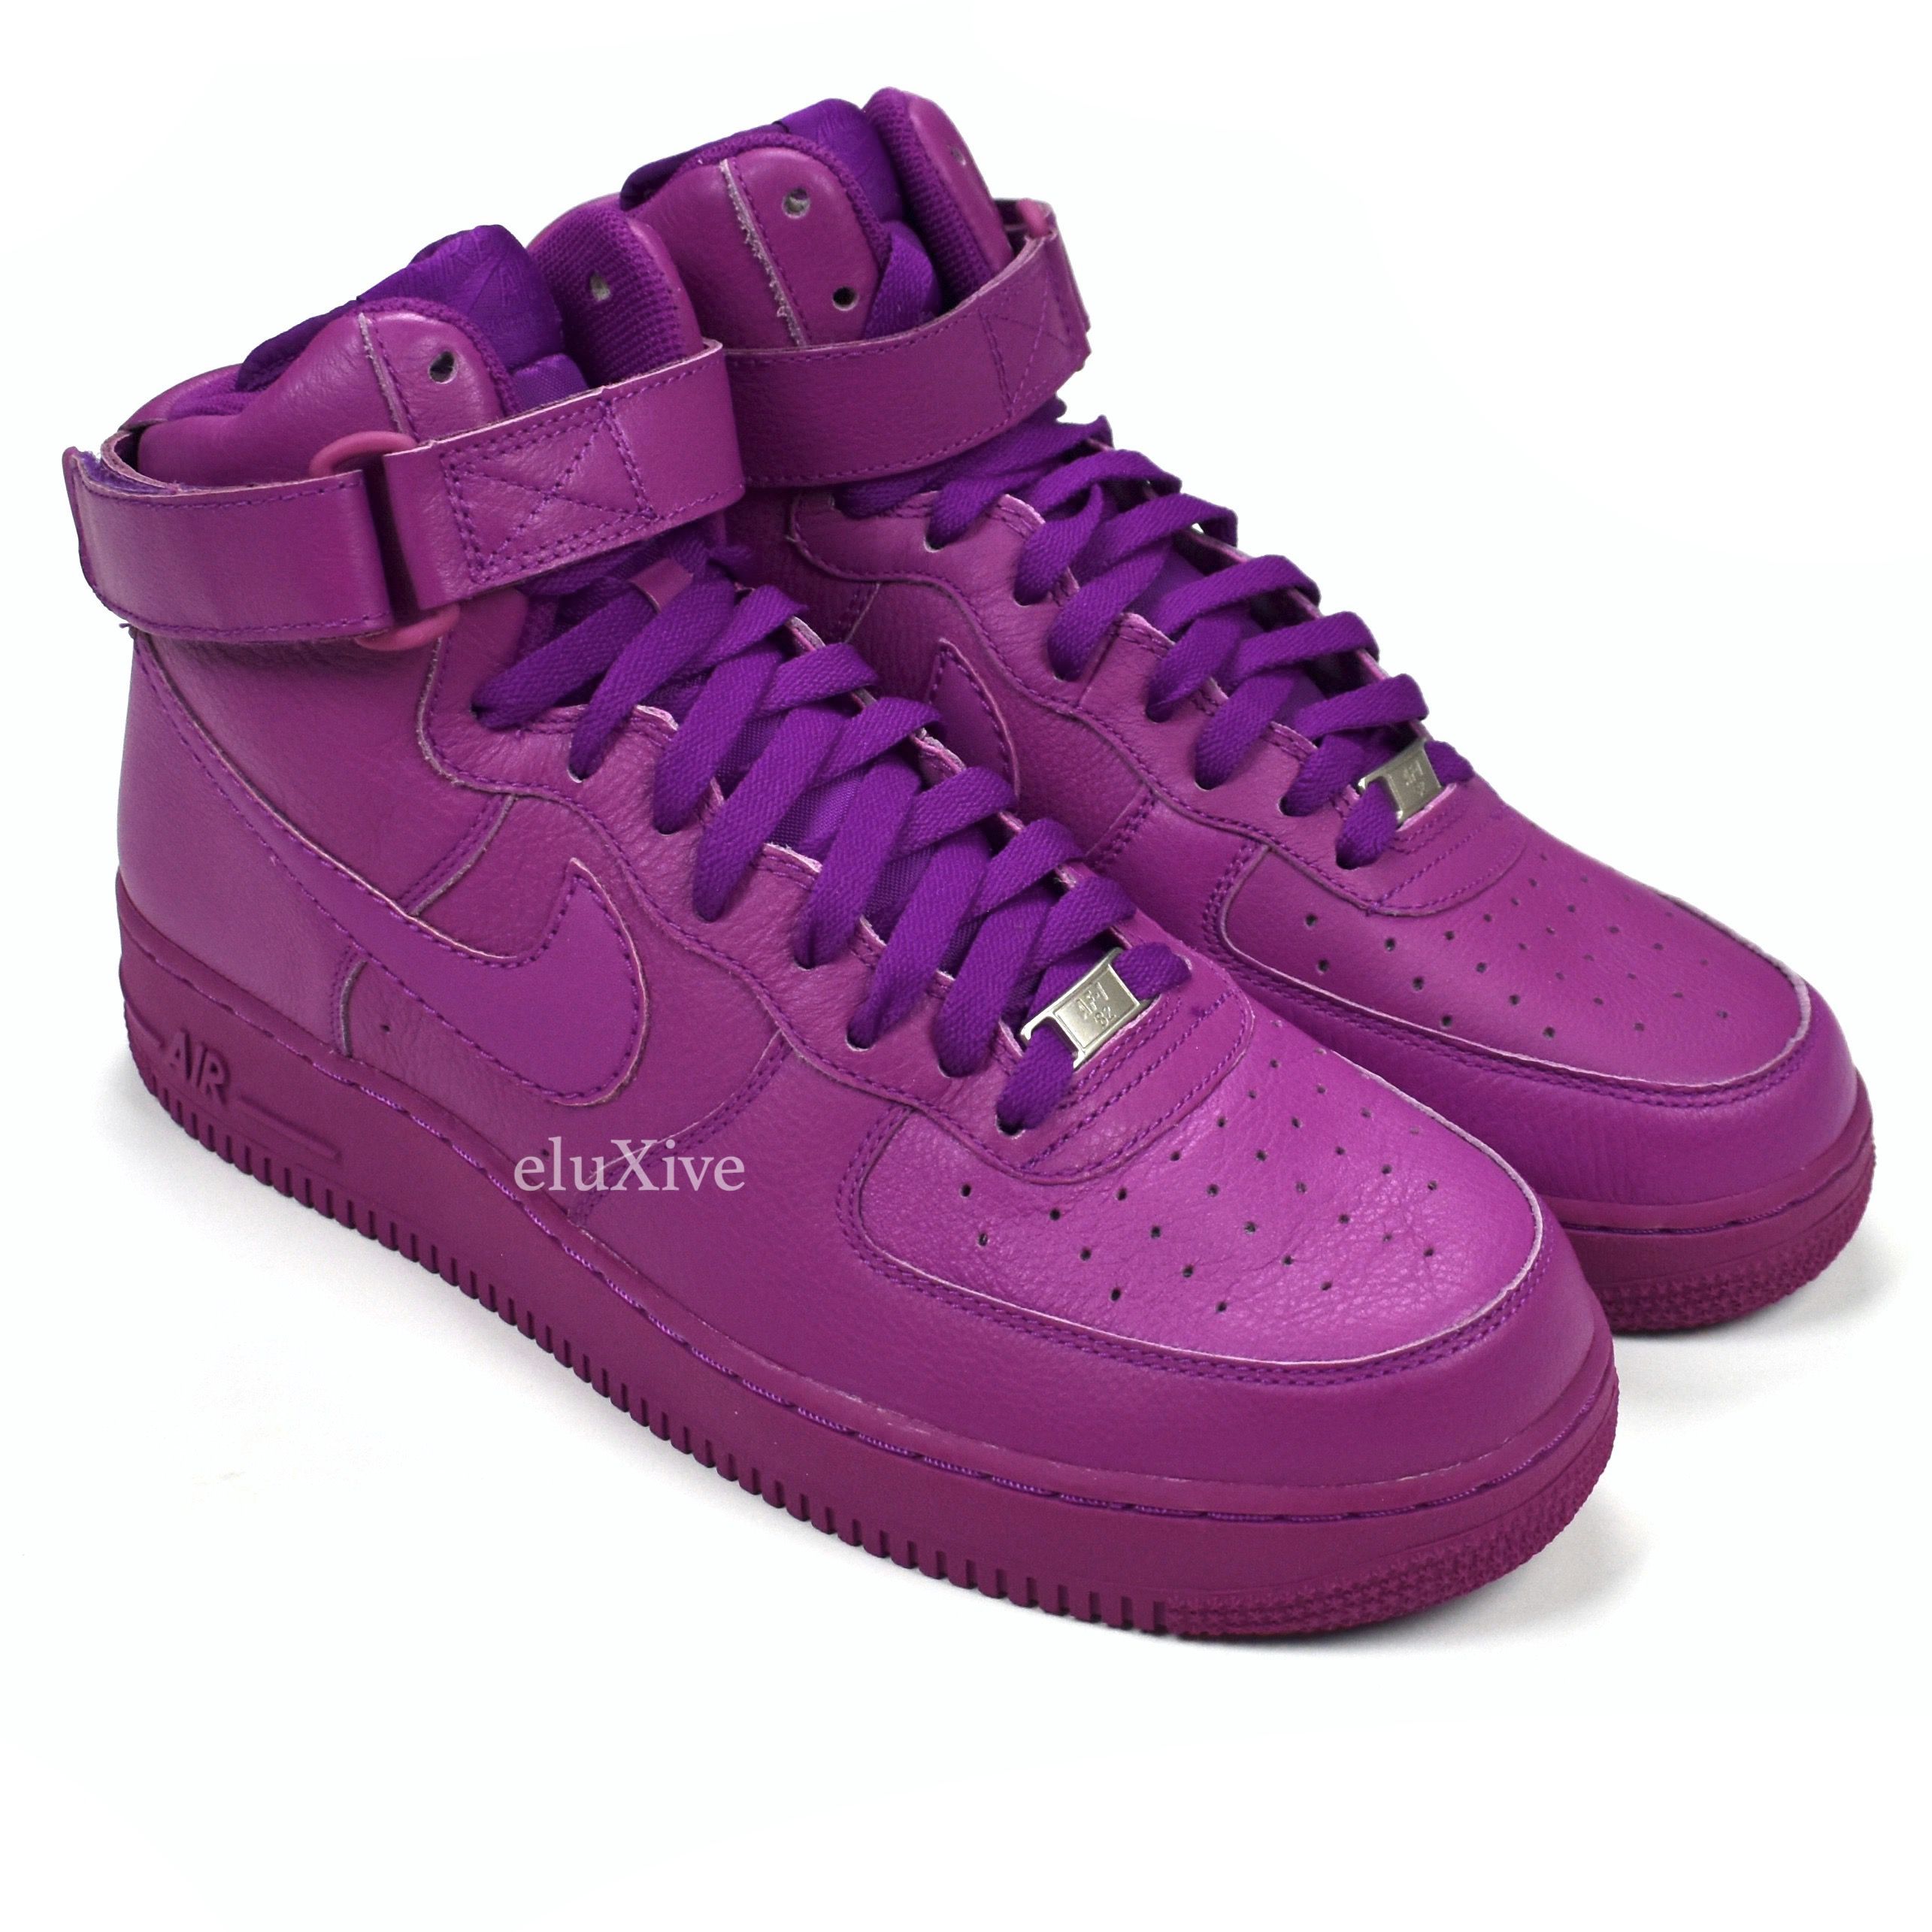 Nike Nike Air Force 1 High Color Pack 2008 Red Plum DS Size US 10.5 / EU 43-44 - 1 Preview